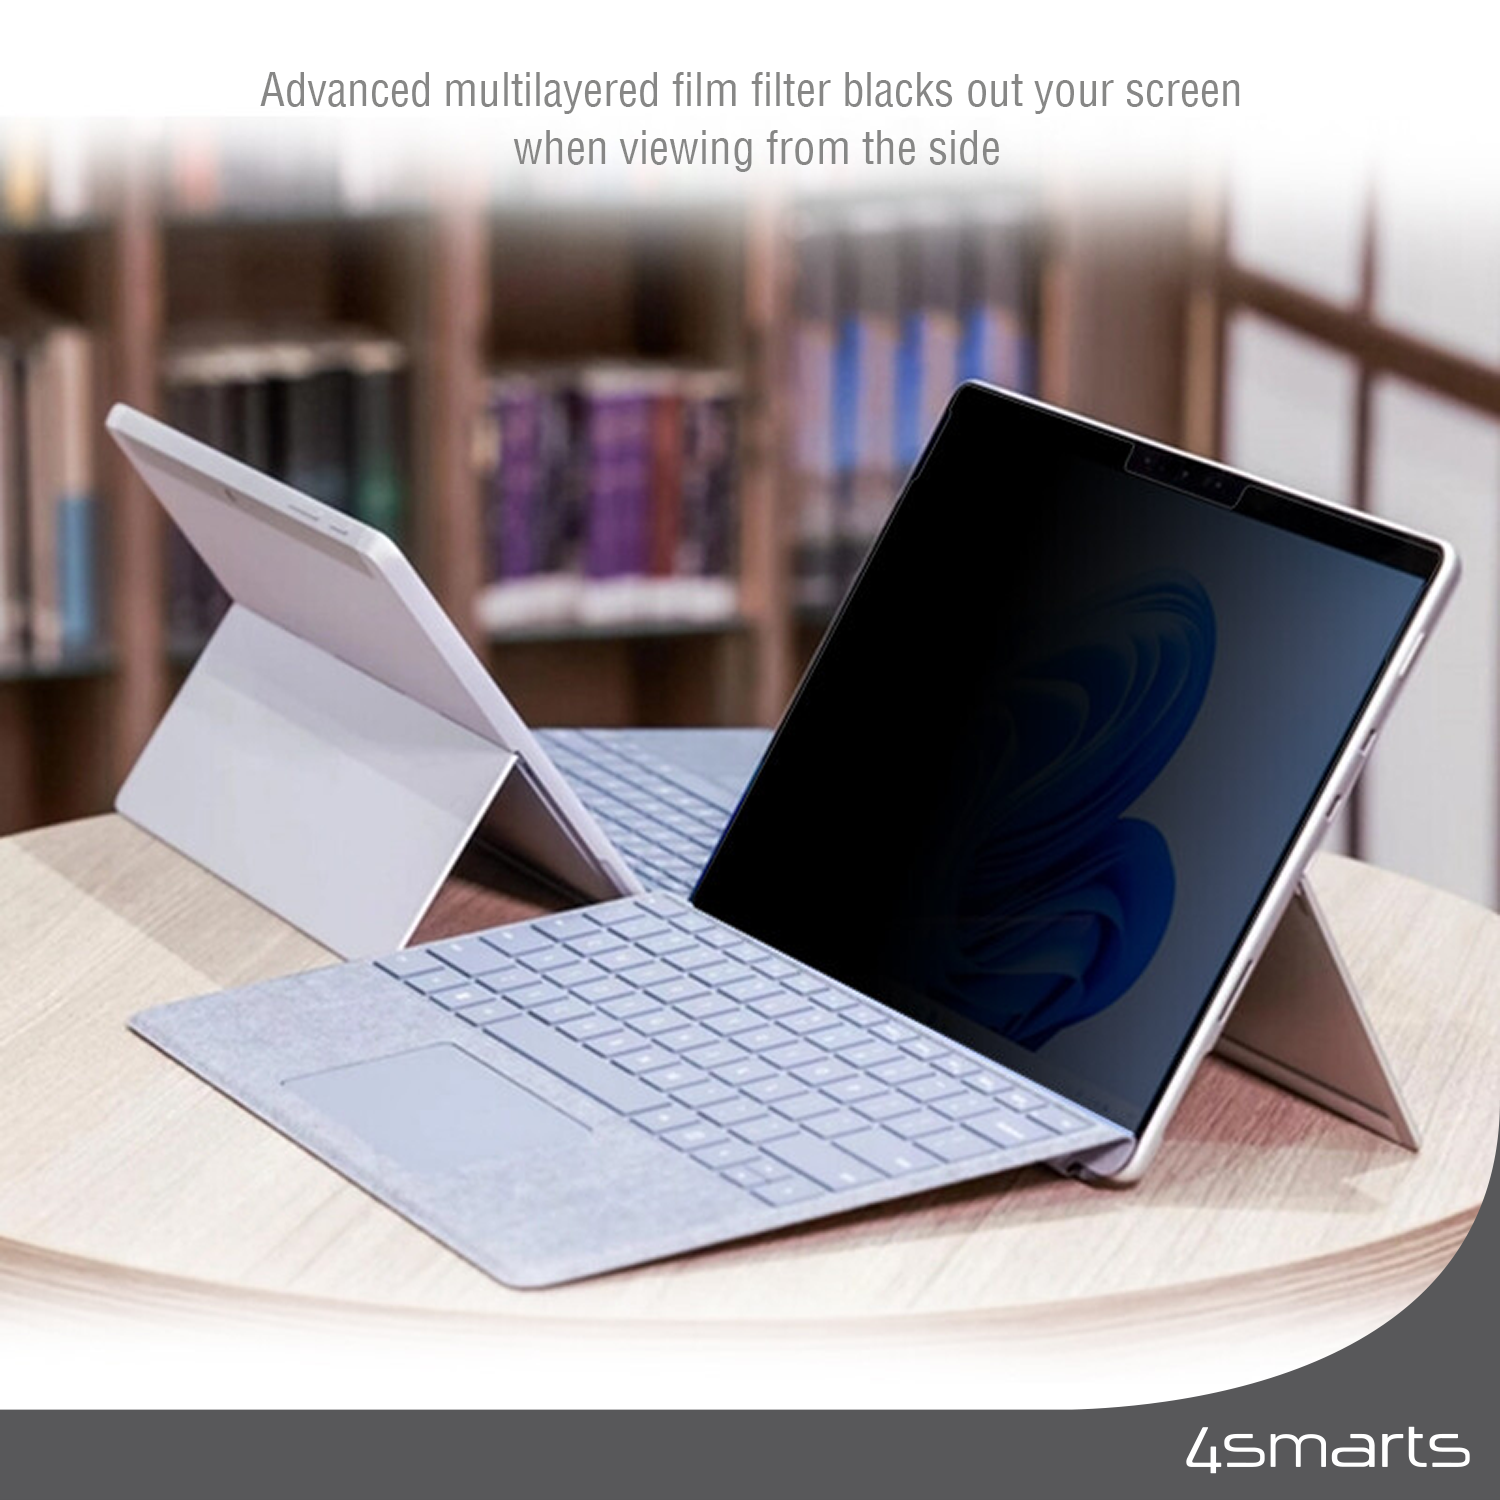 With our 4smarts Smartprotect privacy screen protector for Surface Pro 8/Pro 9 only you see what’s on your tablet screen.